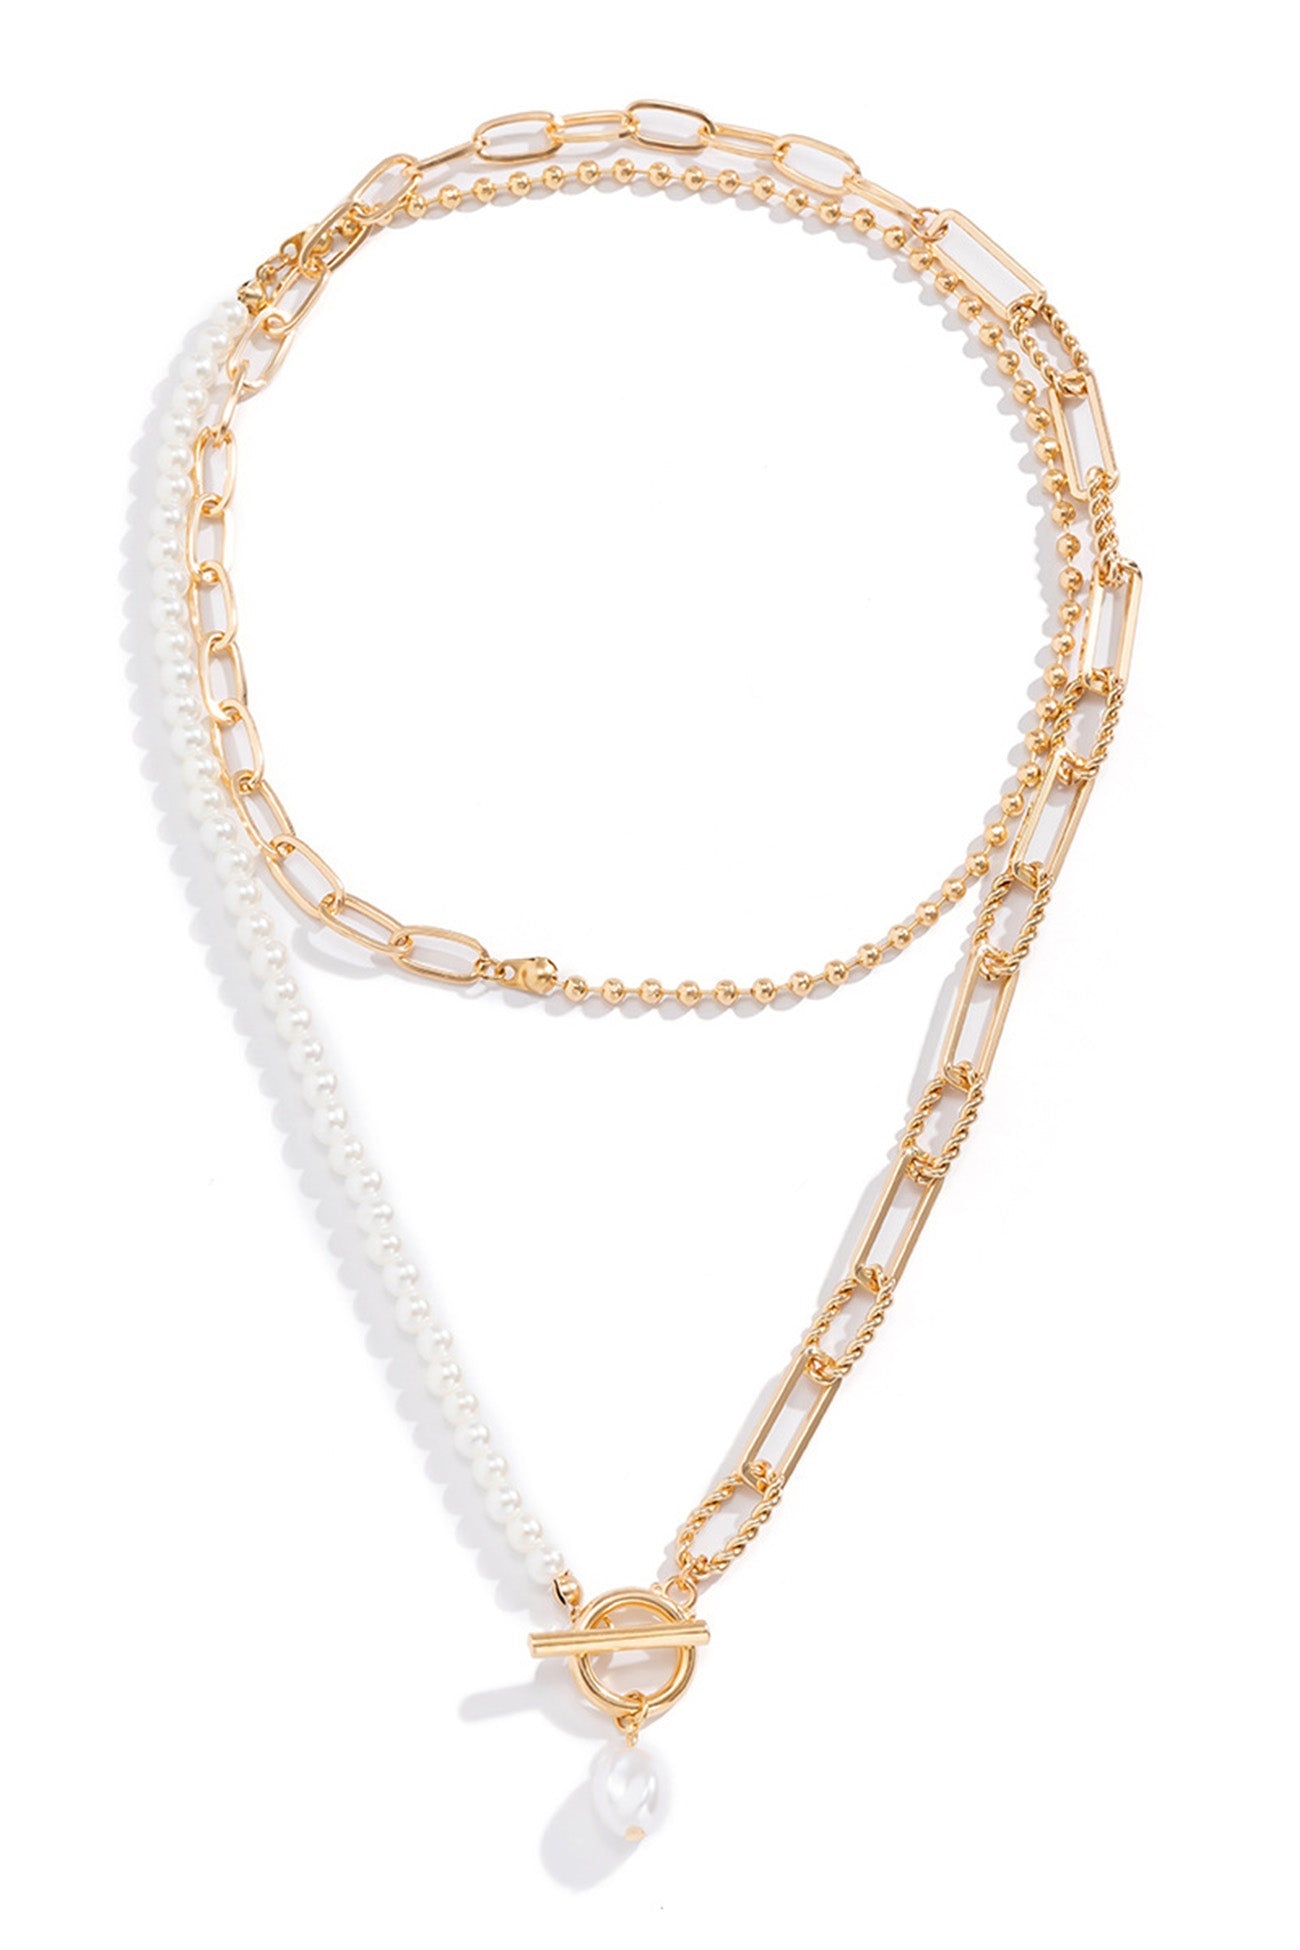 Flytonn-Valentine's Day gift Pearl Chain Stack Necklace